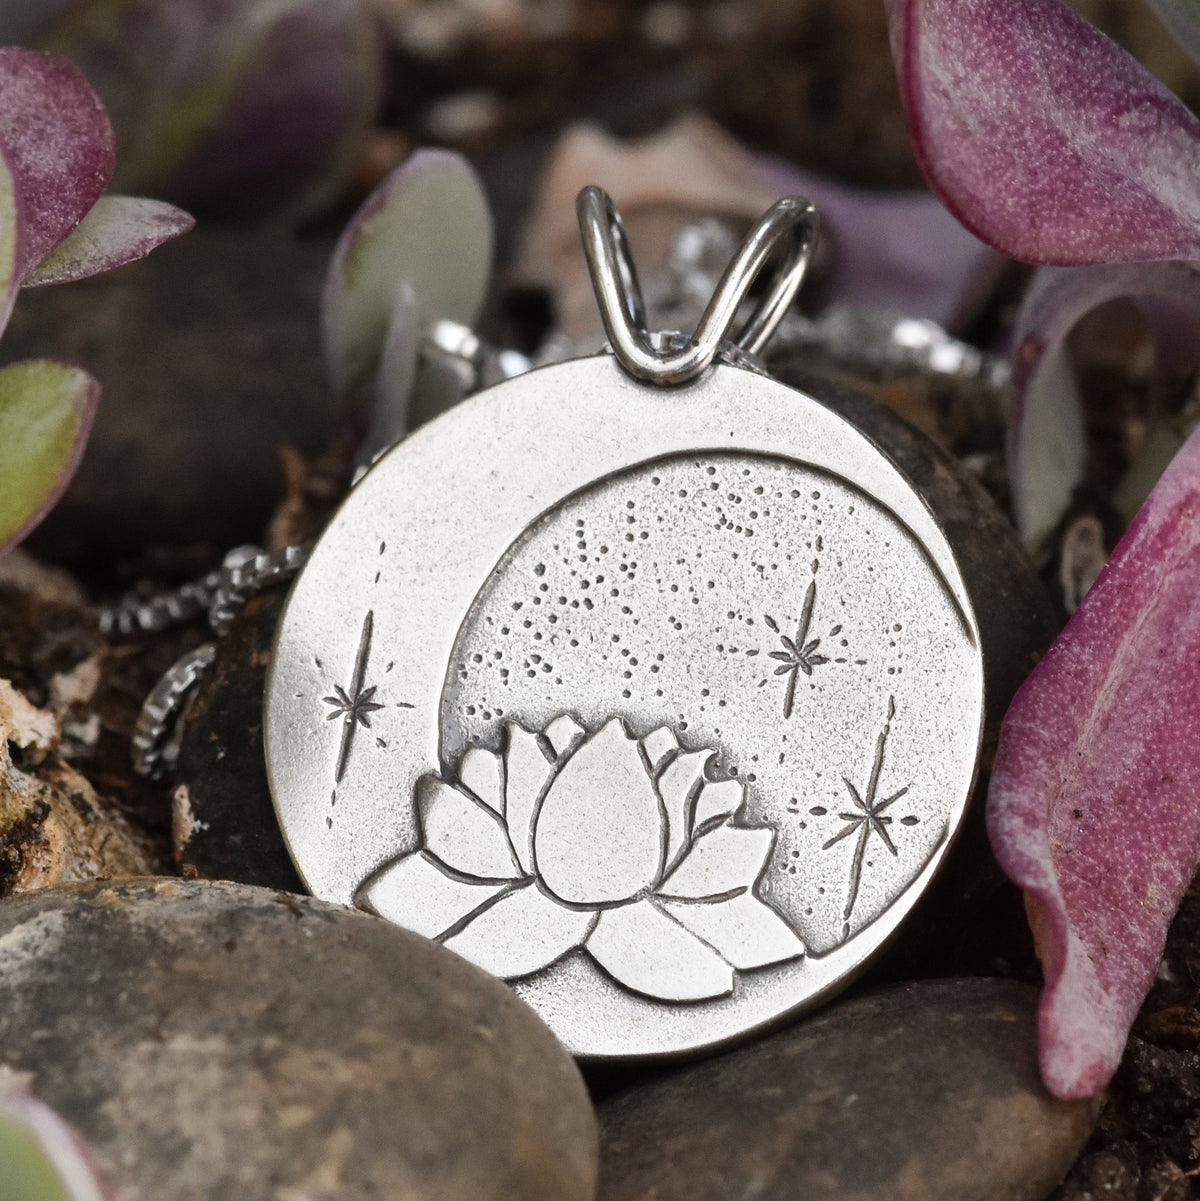 Blooming Lotus Pendant - Fundraiser for the Great Lakes Recovery Centers - Silver Pendant   7131 - handmade by Beth Millner Jewelry